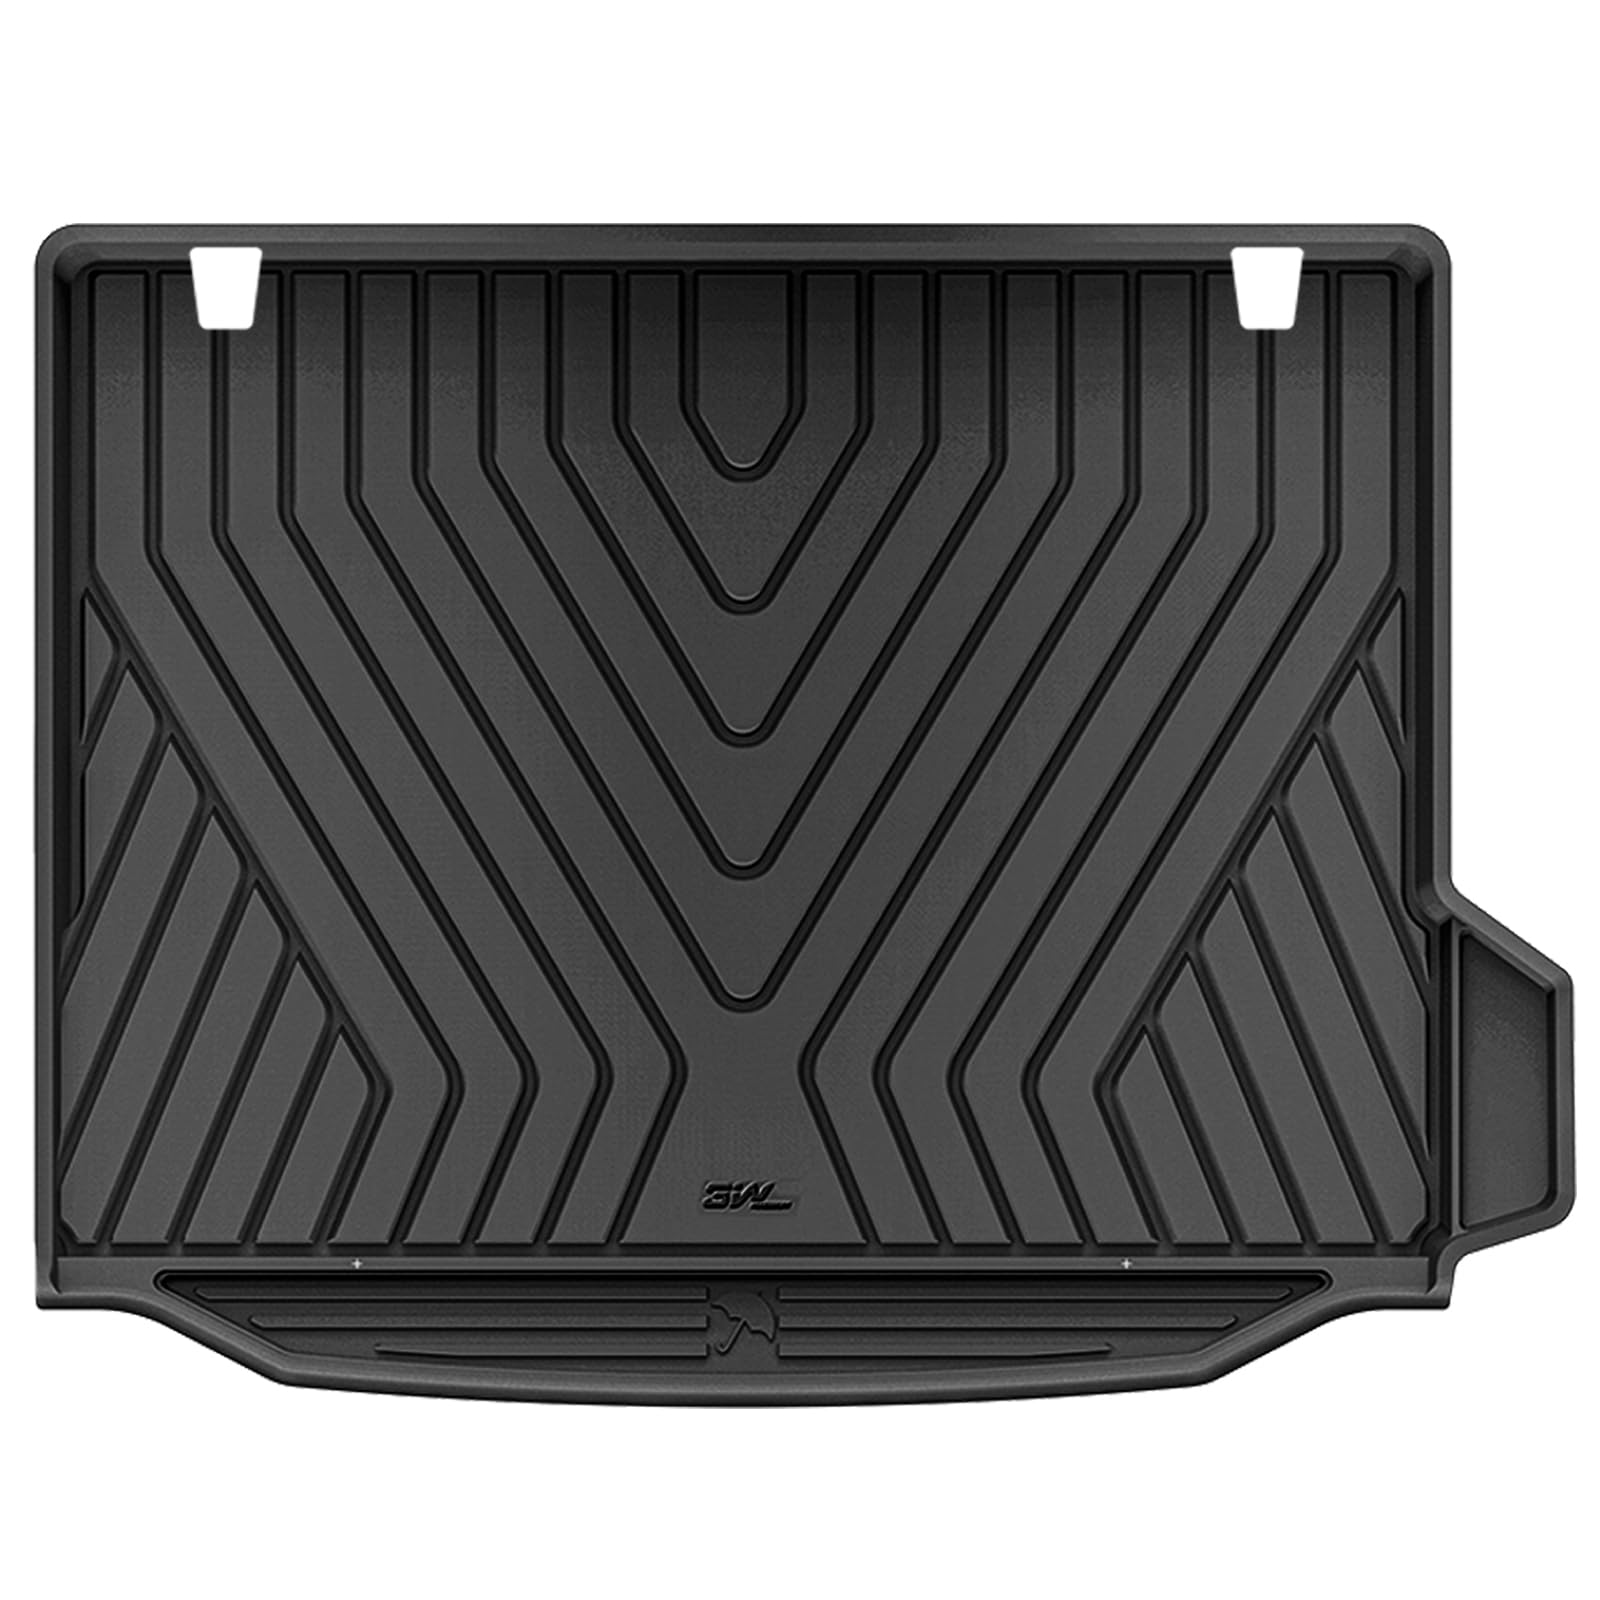 3W BMW 2019-2024 X4 M M40i xDrive30i Floor Mats & Cargo Mats TPE Material & All-Weather Protection Vehicles & Parts 3Wliners 2019-2024 X4 2019-2024 Trunk Mat